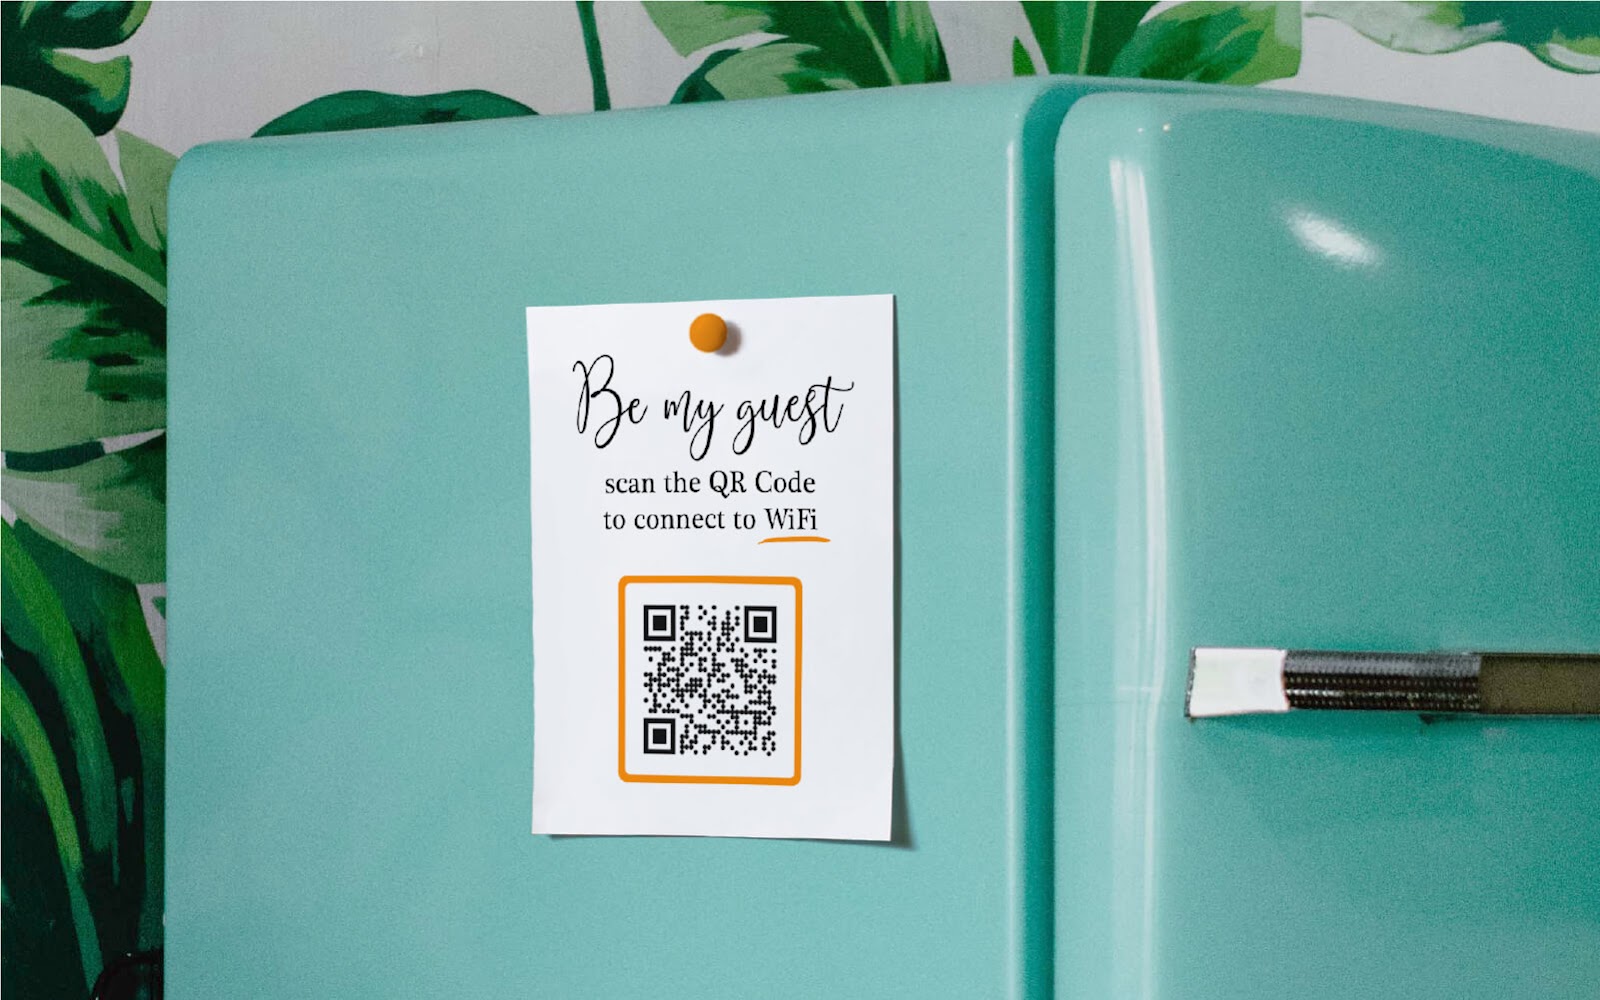 QR Code on a fridge inviting guests to connect to wifi